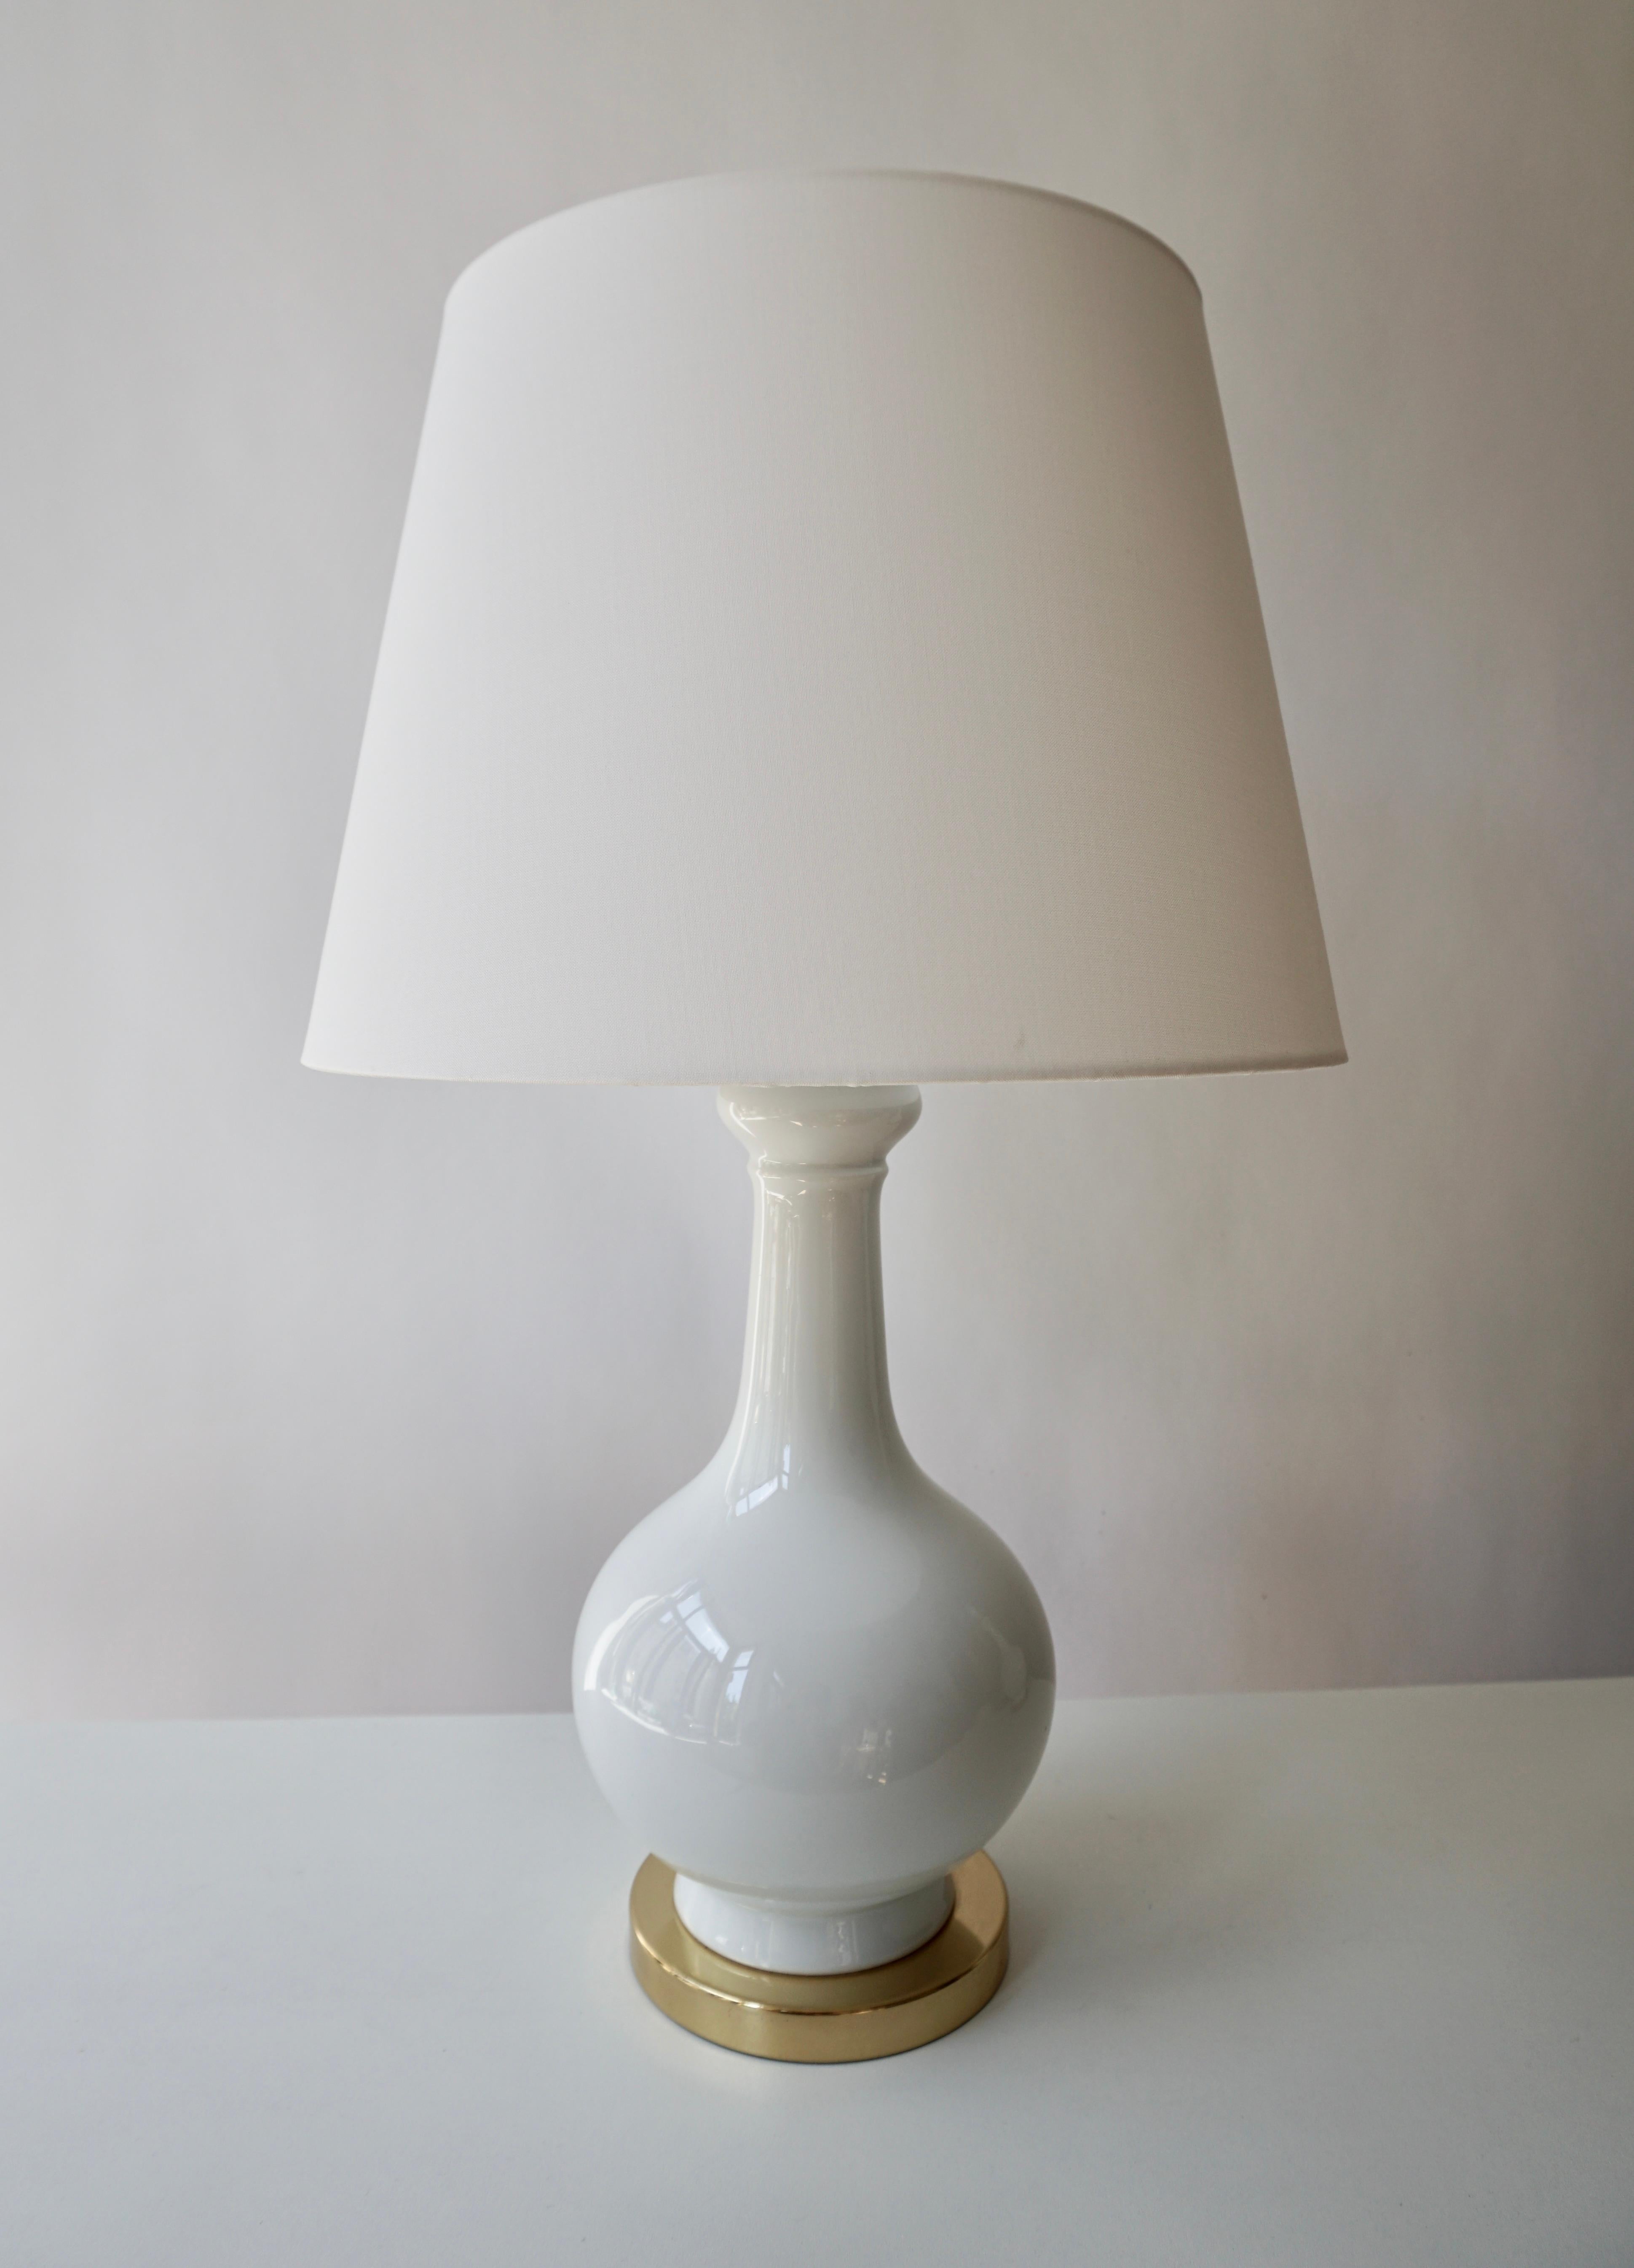 Two elegant white porcelain Italian Mid-Century Modern table lamps on a brass base.
Measures: Diameter 16 cm.
Height 36 cm.

The lampshades are not included in the price.